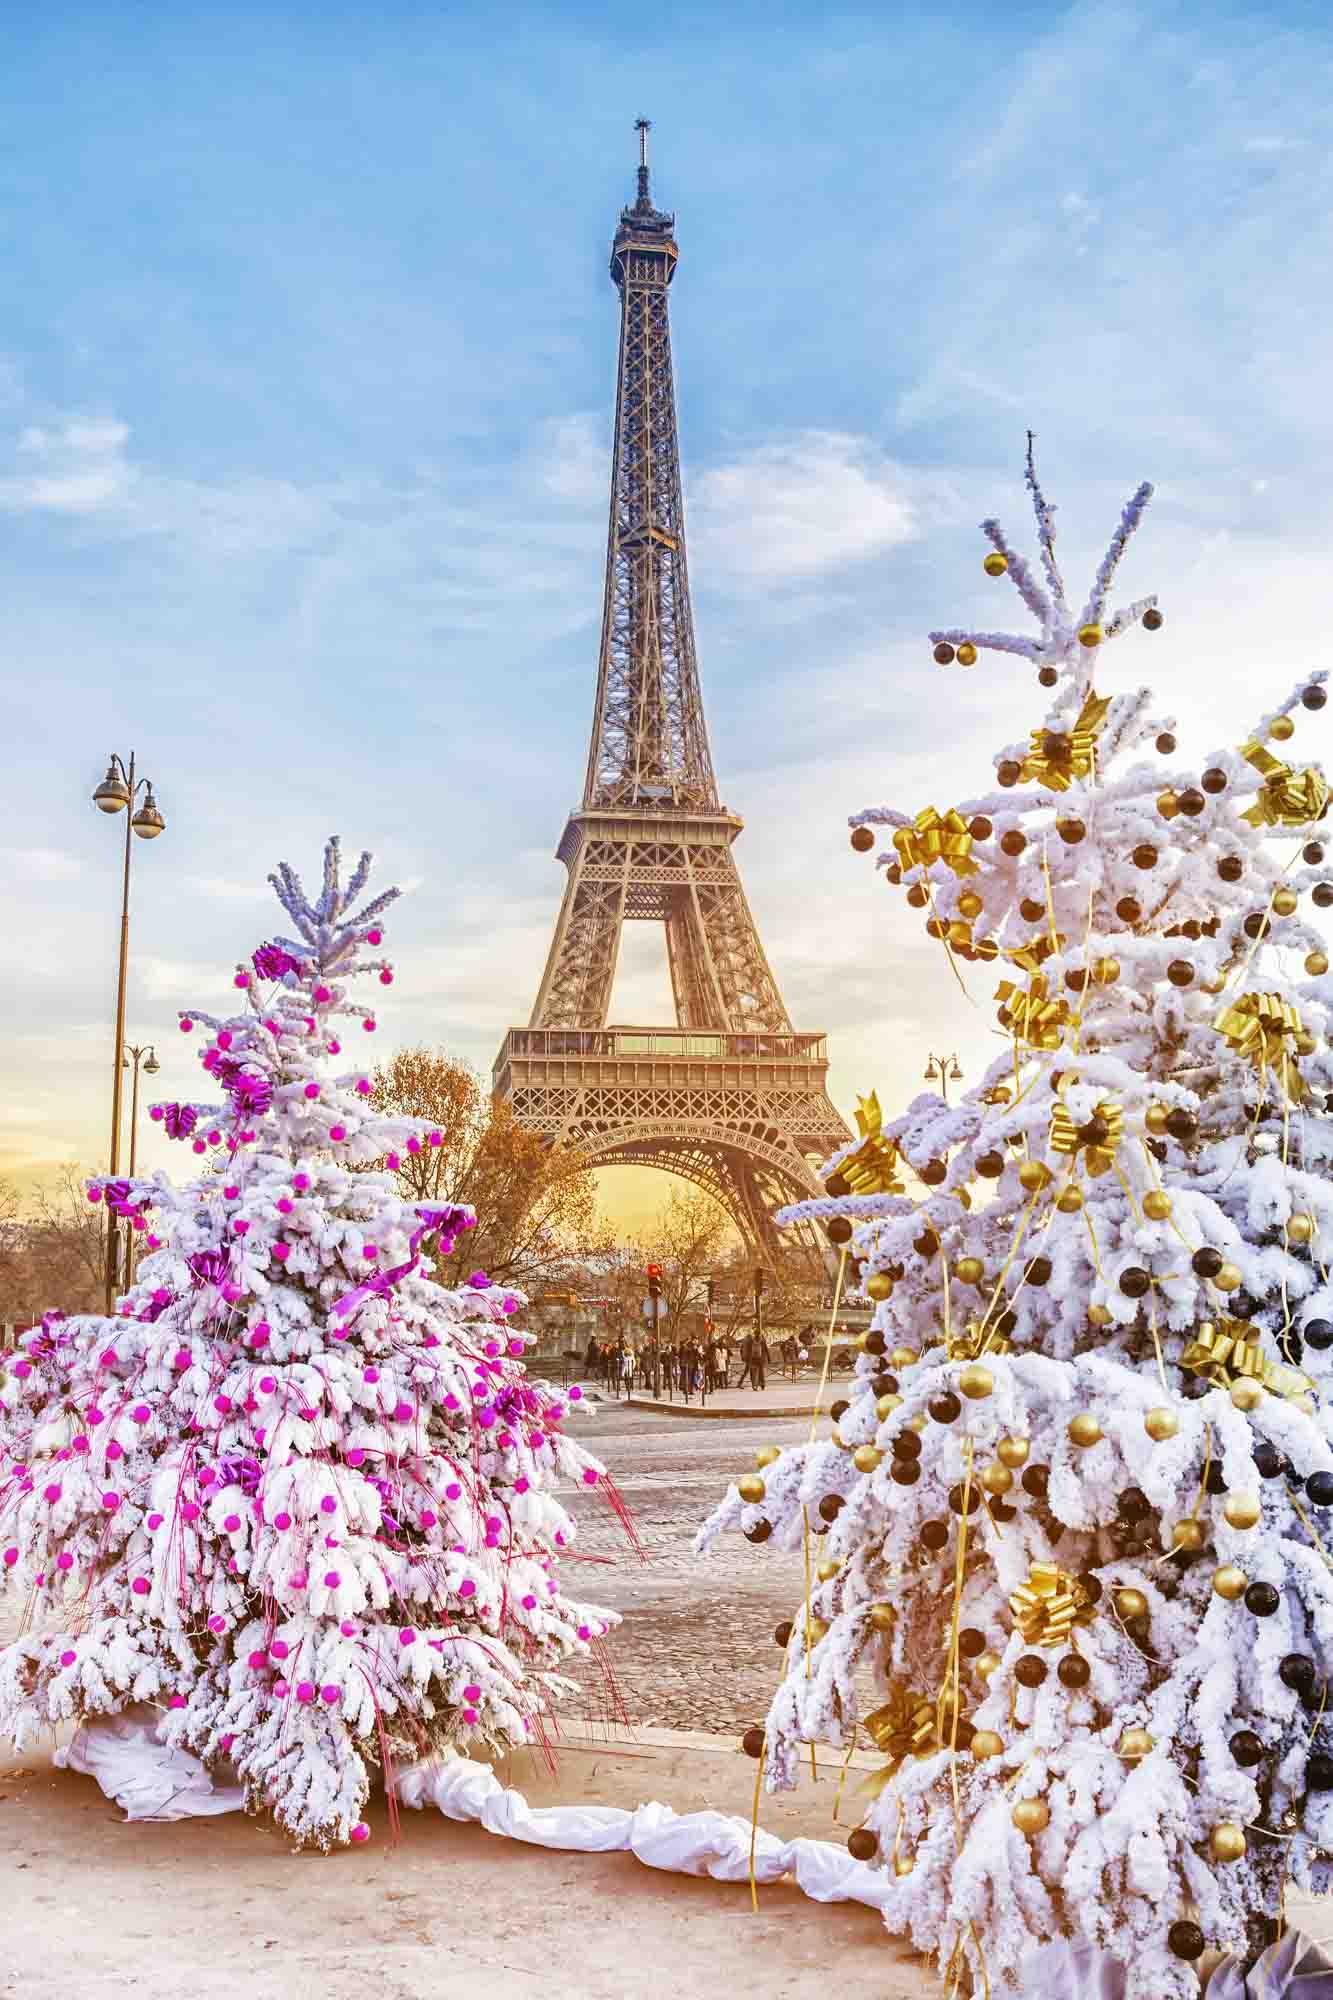 Christmas trees in front of Eiffel Tower in the winter